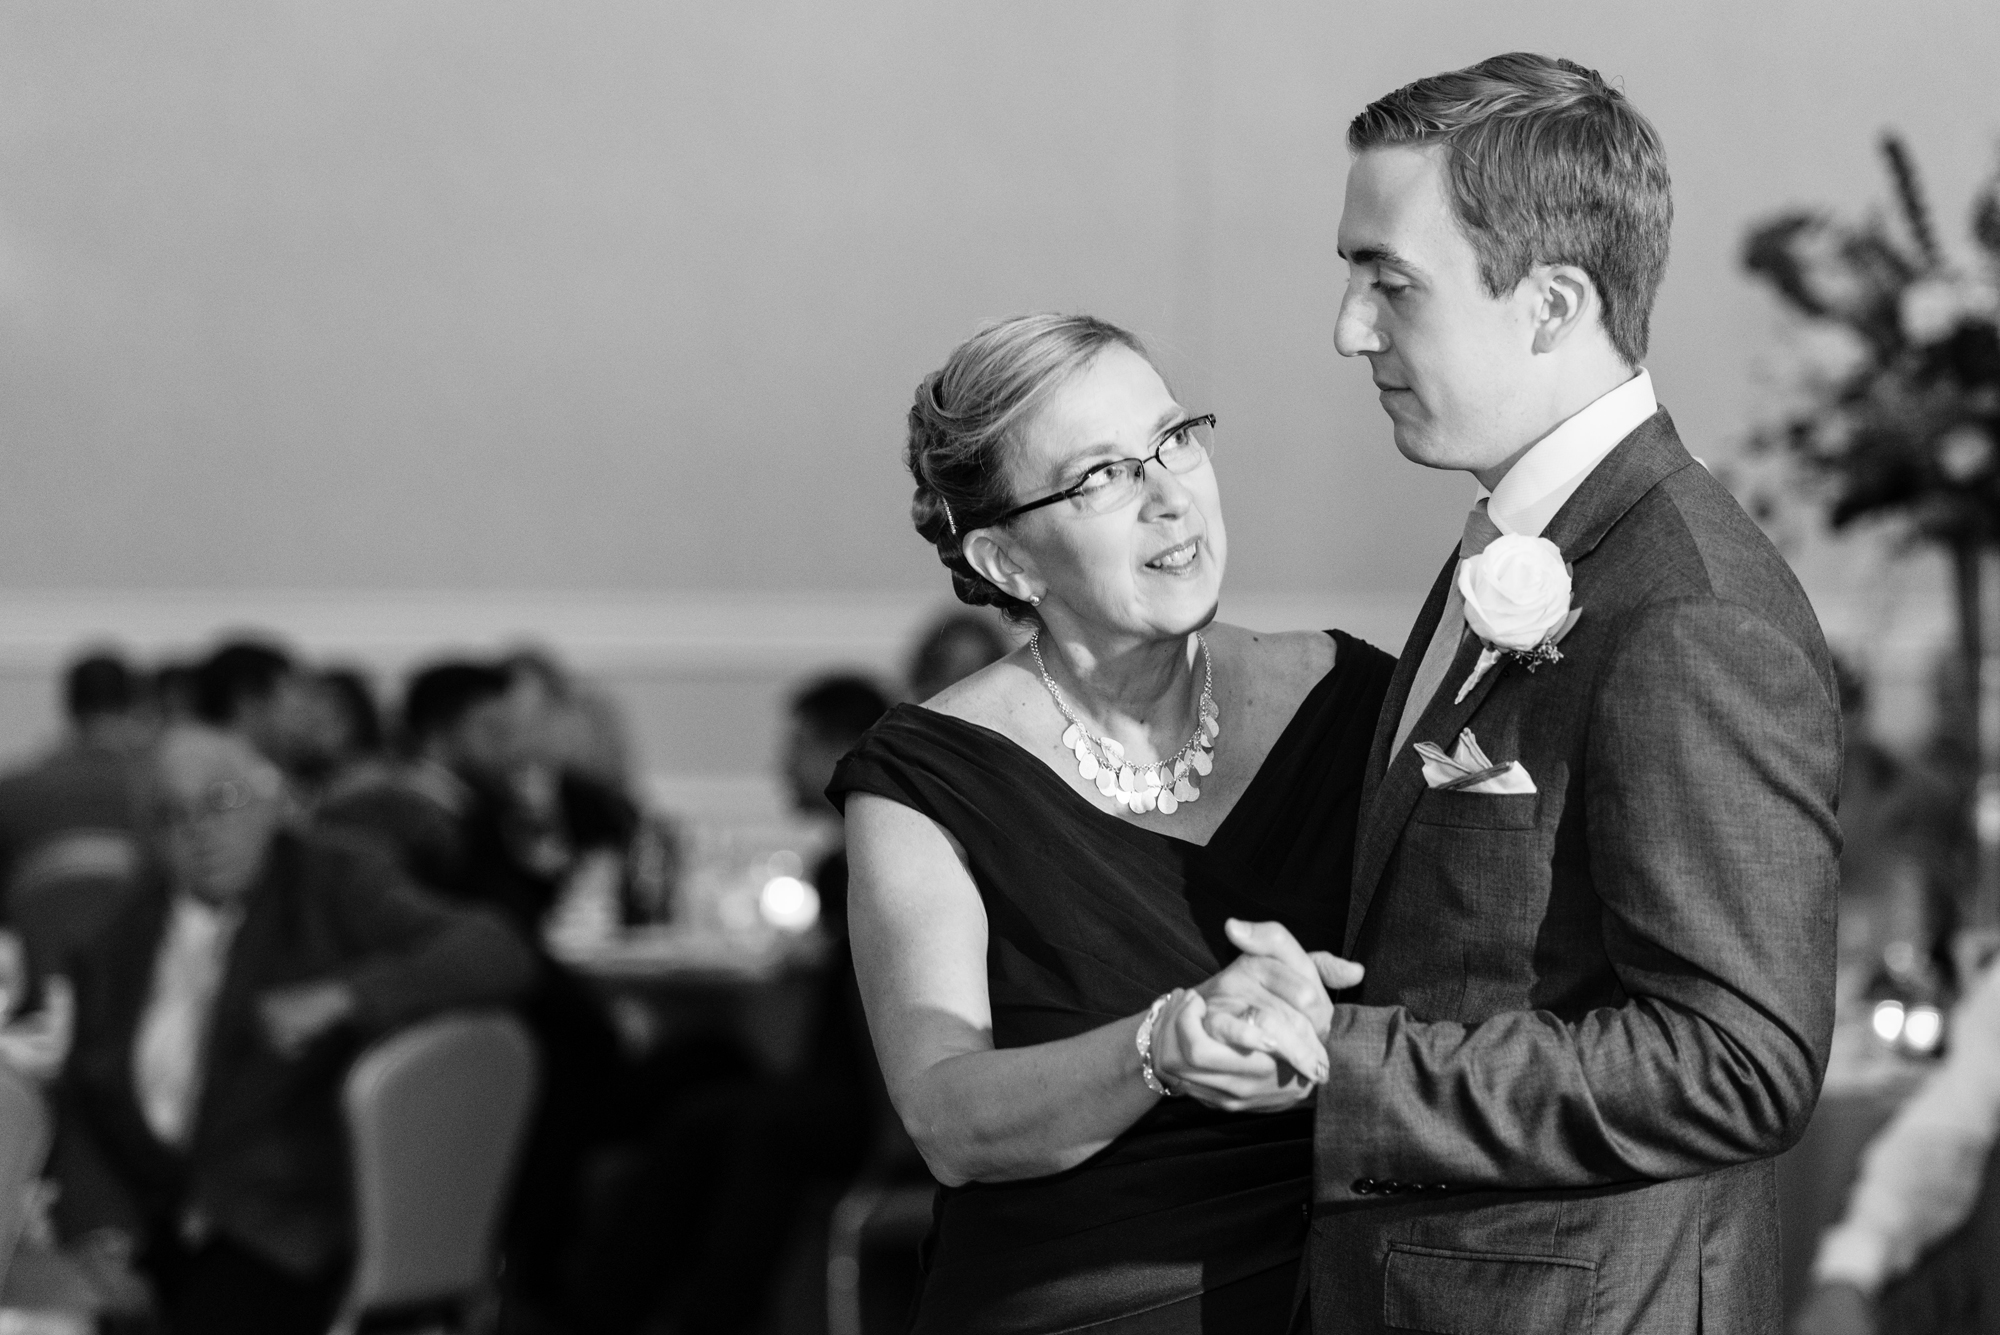 Mother Son first dance at a Wedding Reception at Morris Inn of Venue ND